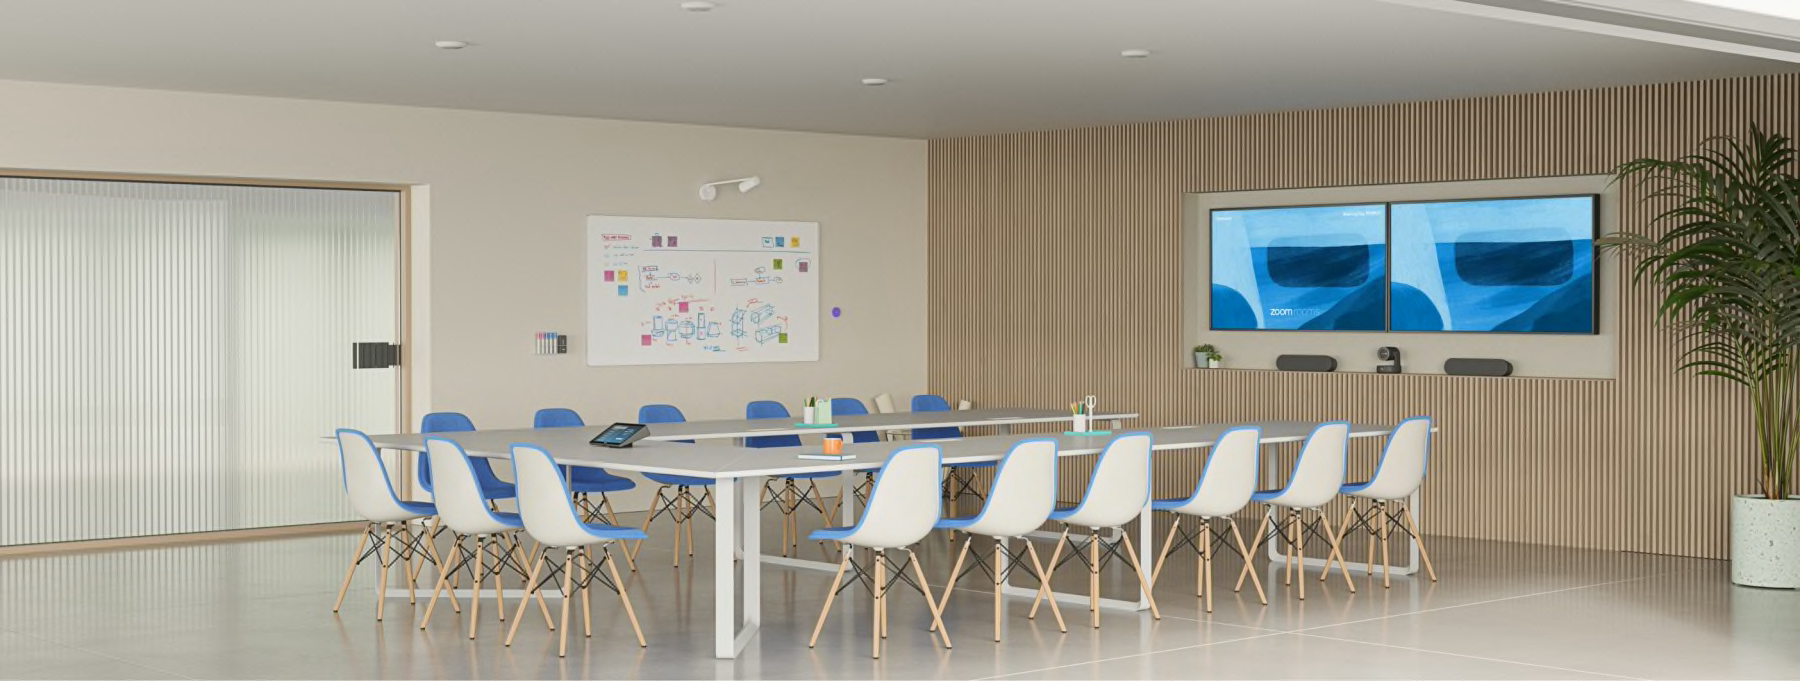 Zoom Solutions for training room space